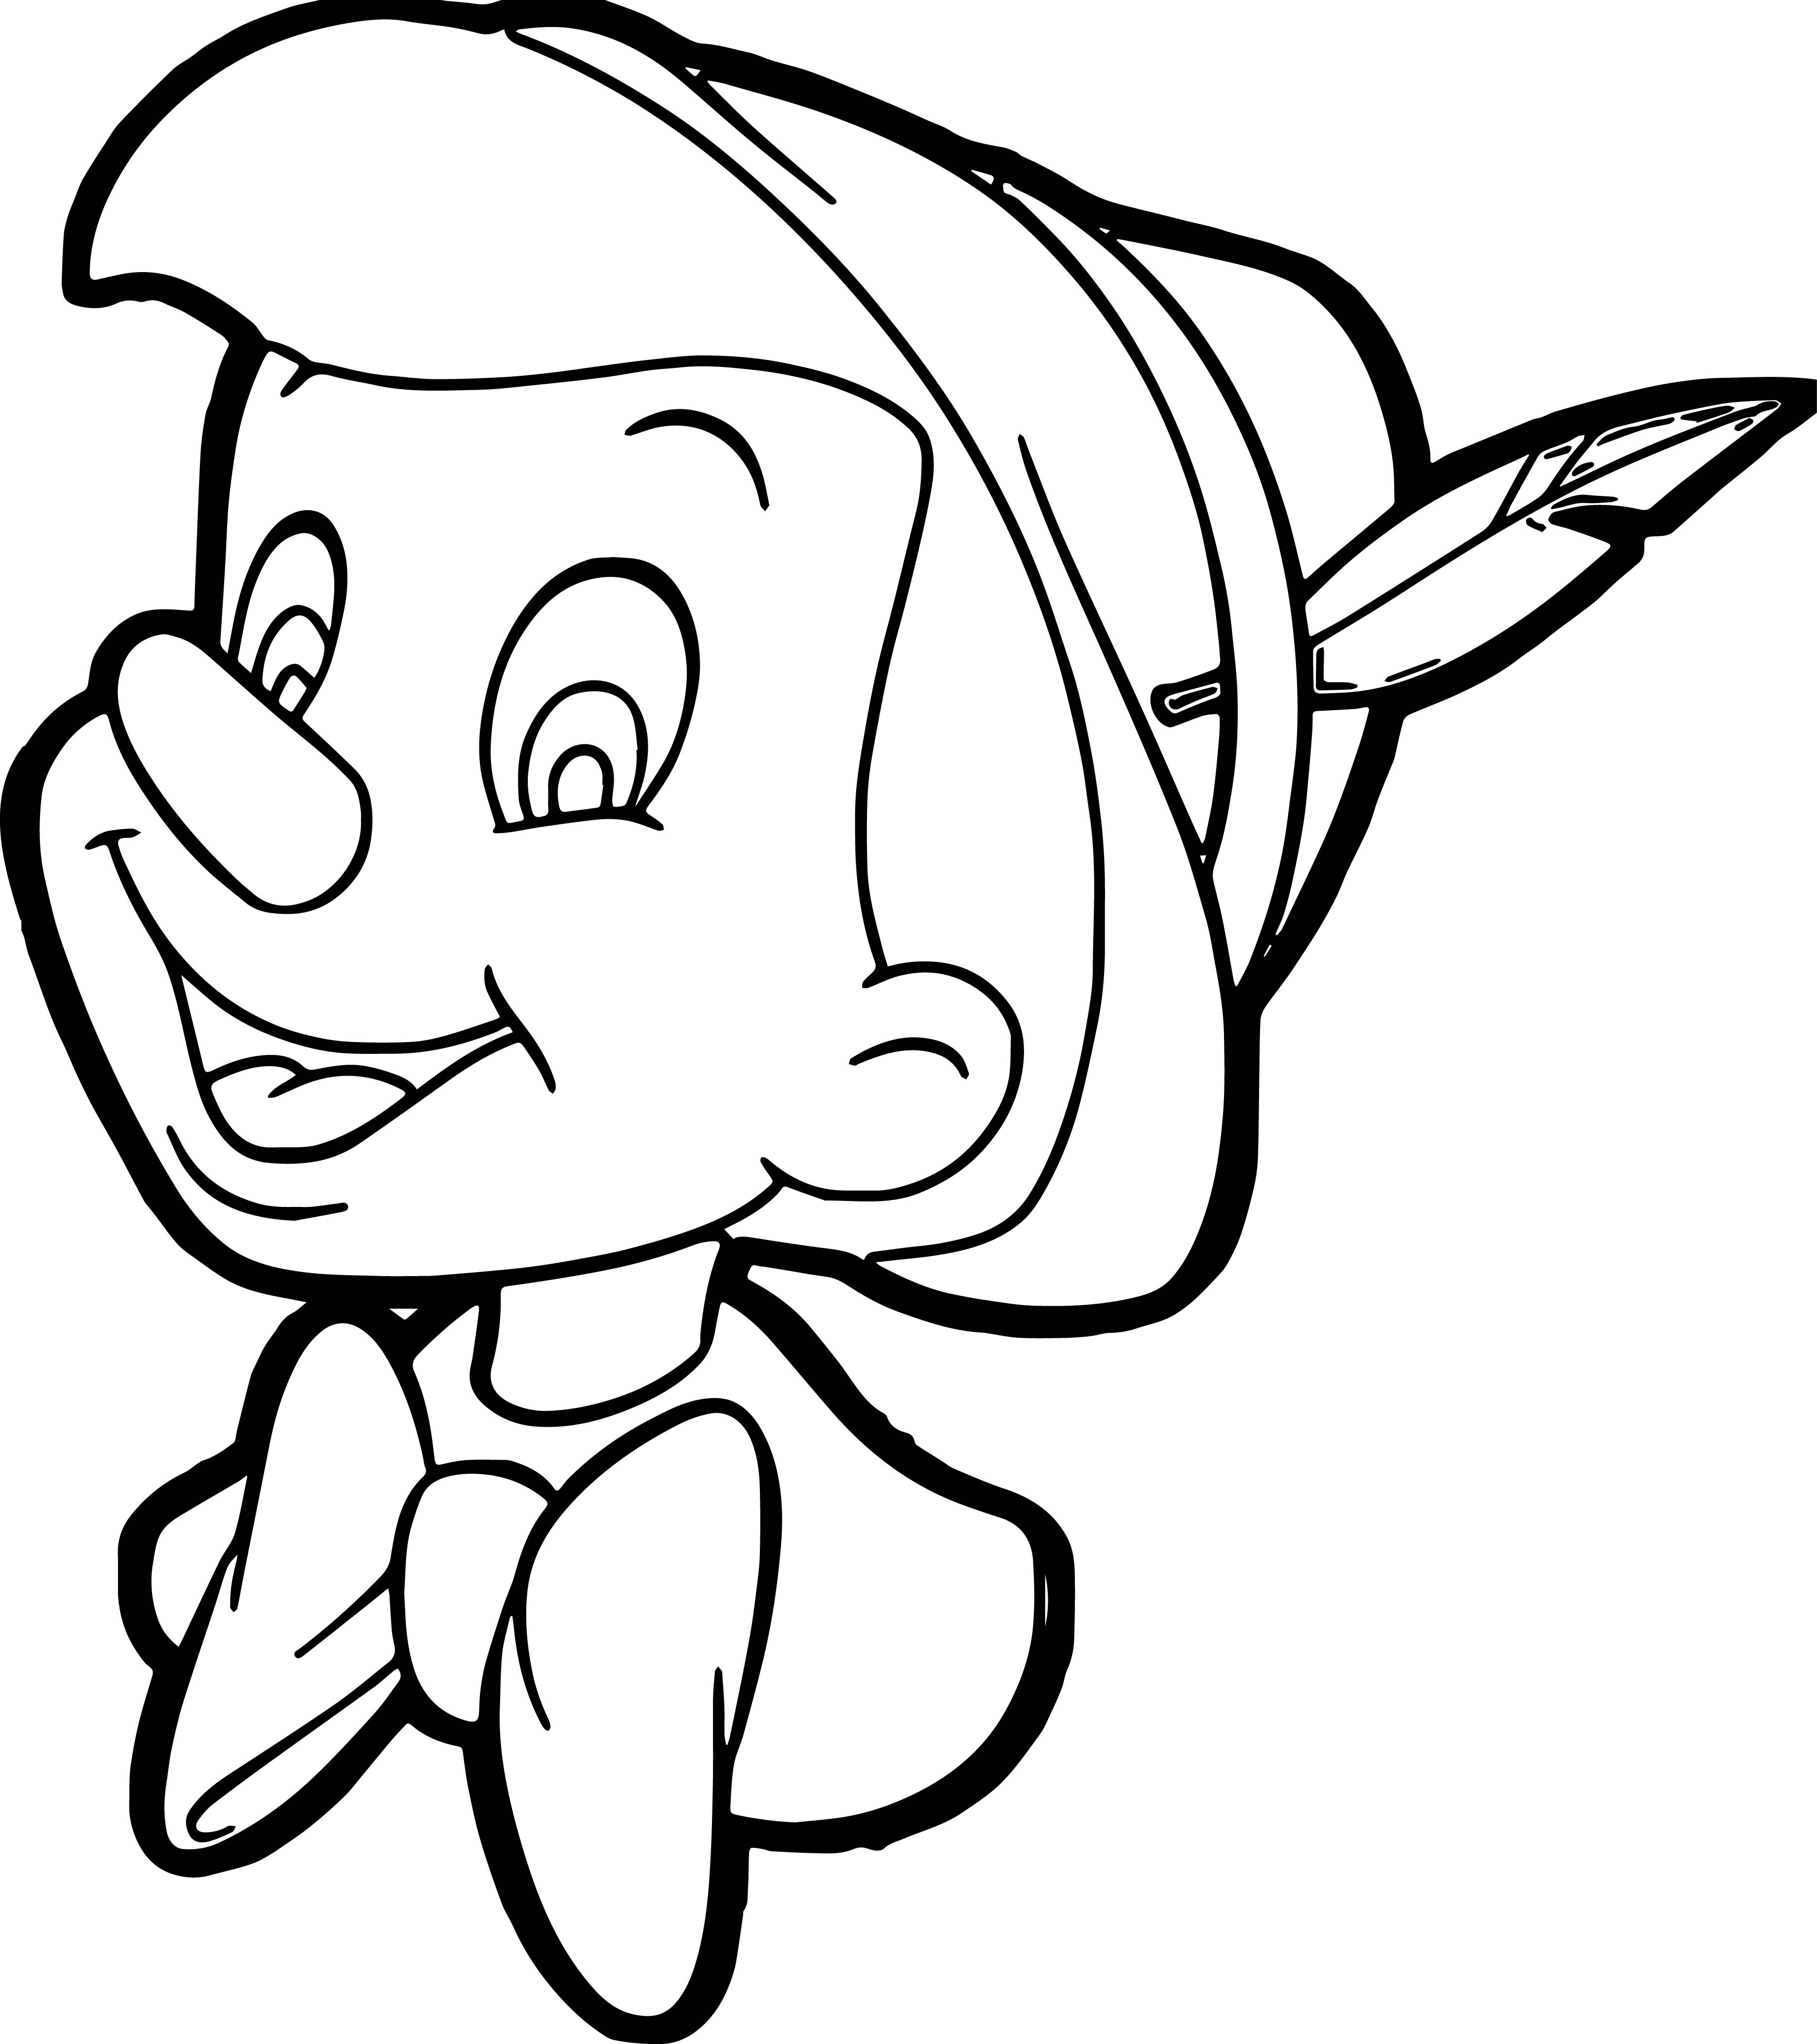 Pinocchio Coloring Page Pinocchio Coloring Page Kids Coloring Page